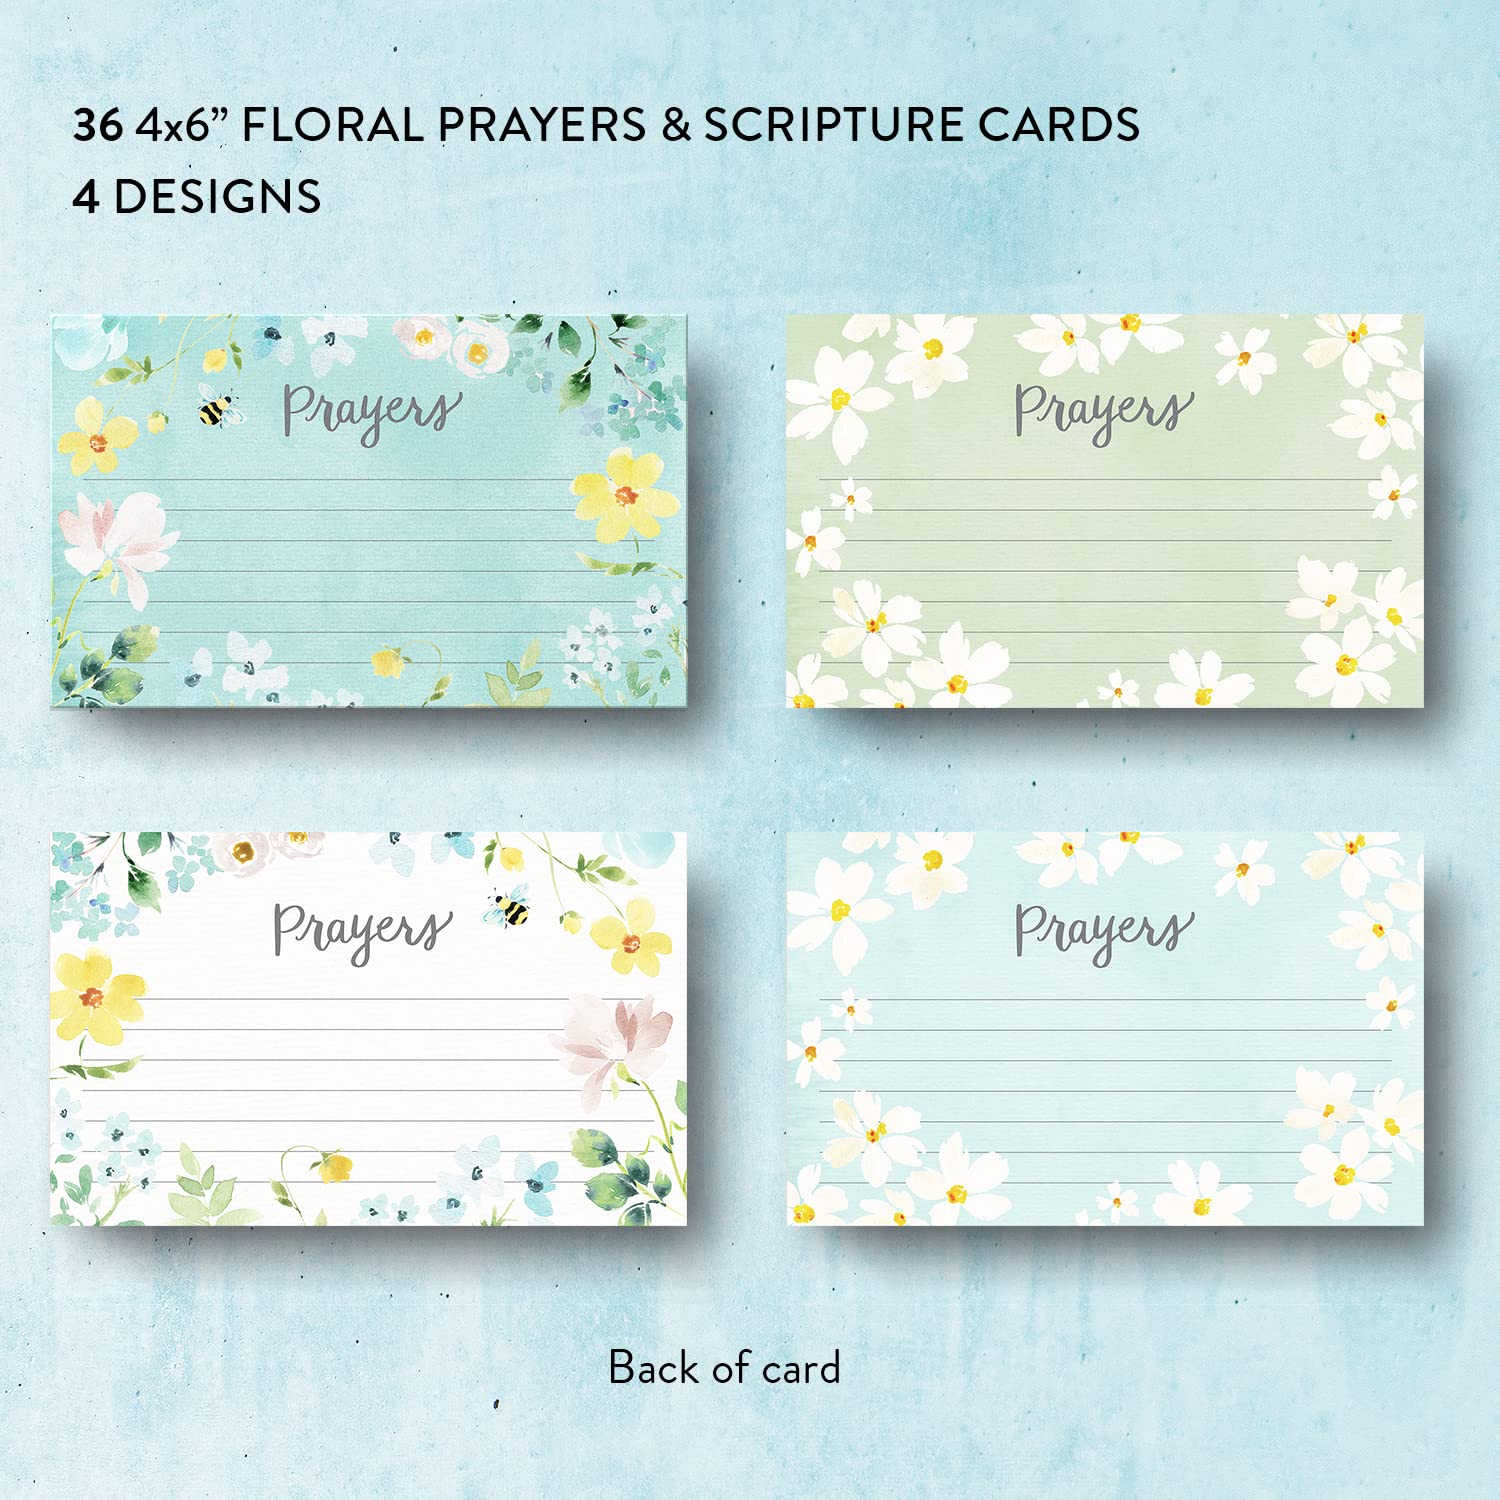 36-pack Eccolo Prayer and Scripture Cards